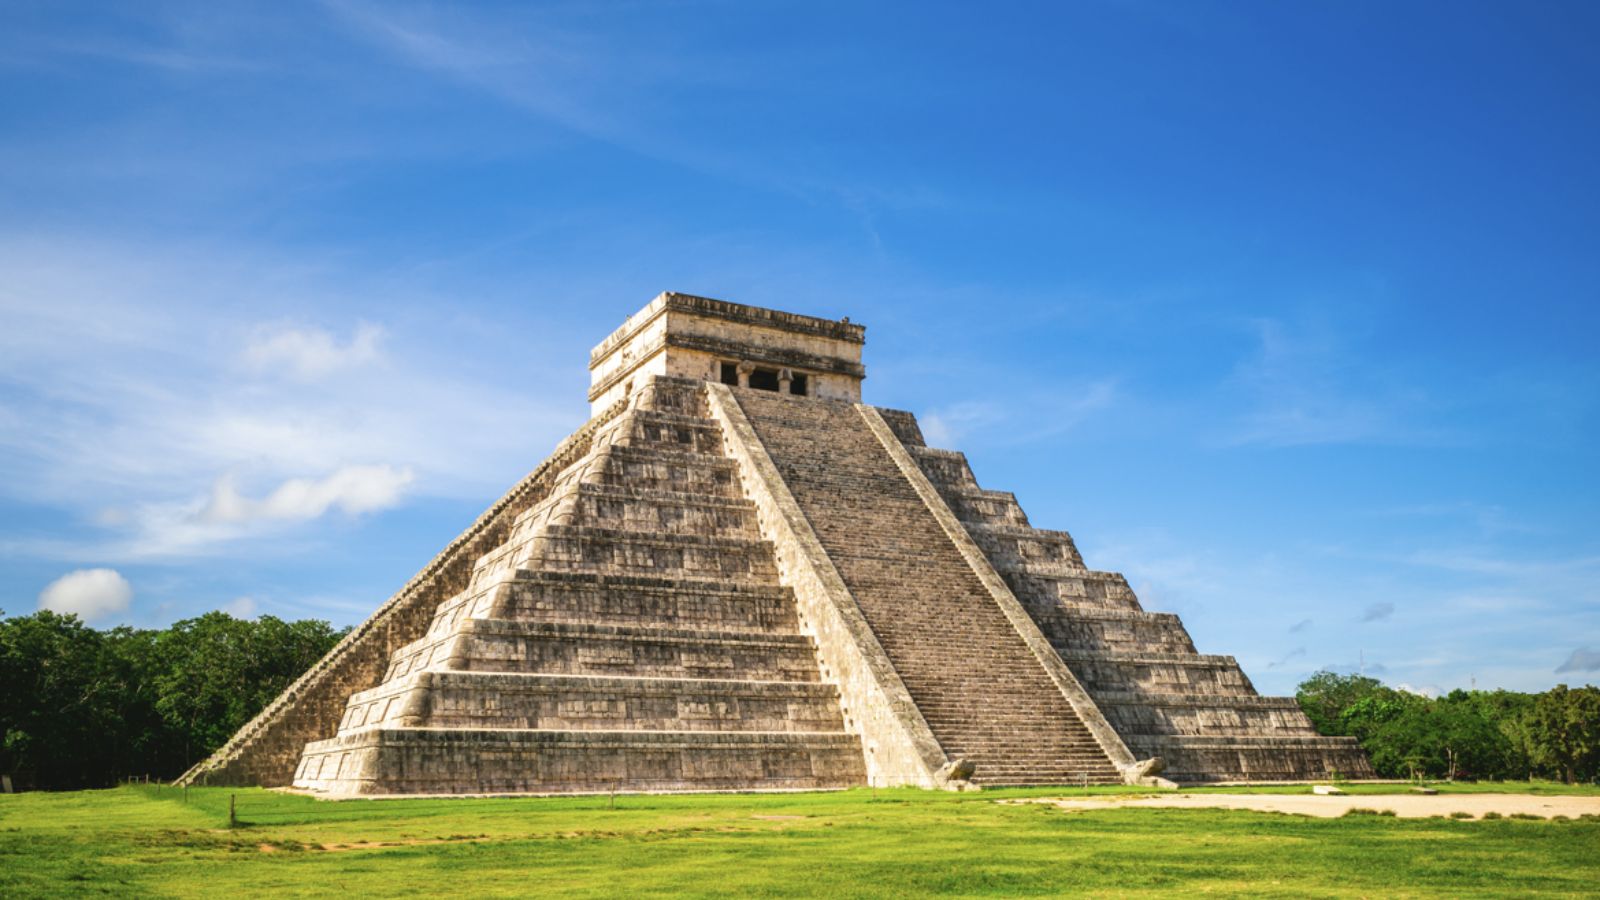 <p>This large pre-Columbian city was built by the Mayan people between 600 and 750 AD and is one of the most visited archaeological sites in Mexico. The site showcases several architectural styles influenced over centuries by different Mayan populations. The centerpiece, the Temple of Kukulcan, has impressive astronomical elements linked to the solar calendar.</p>